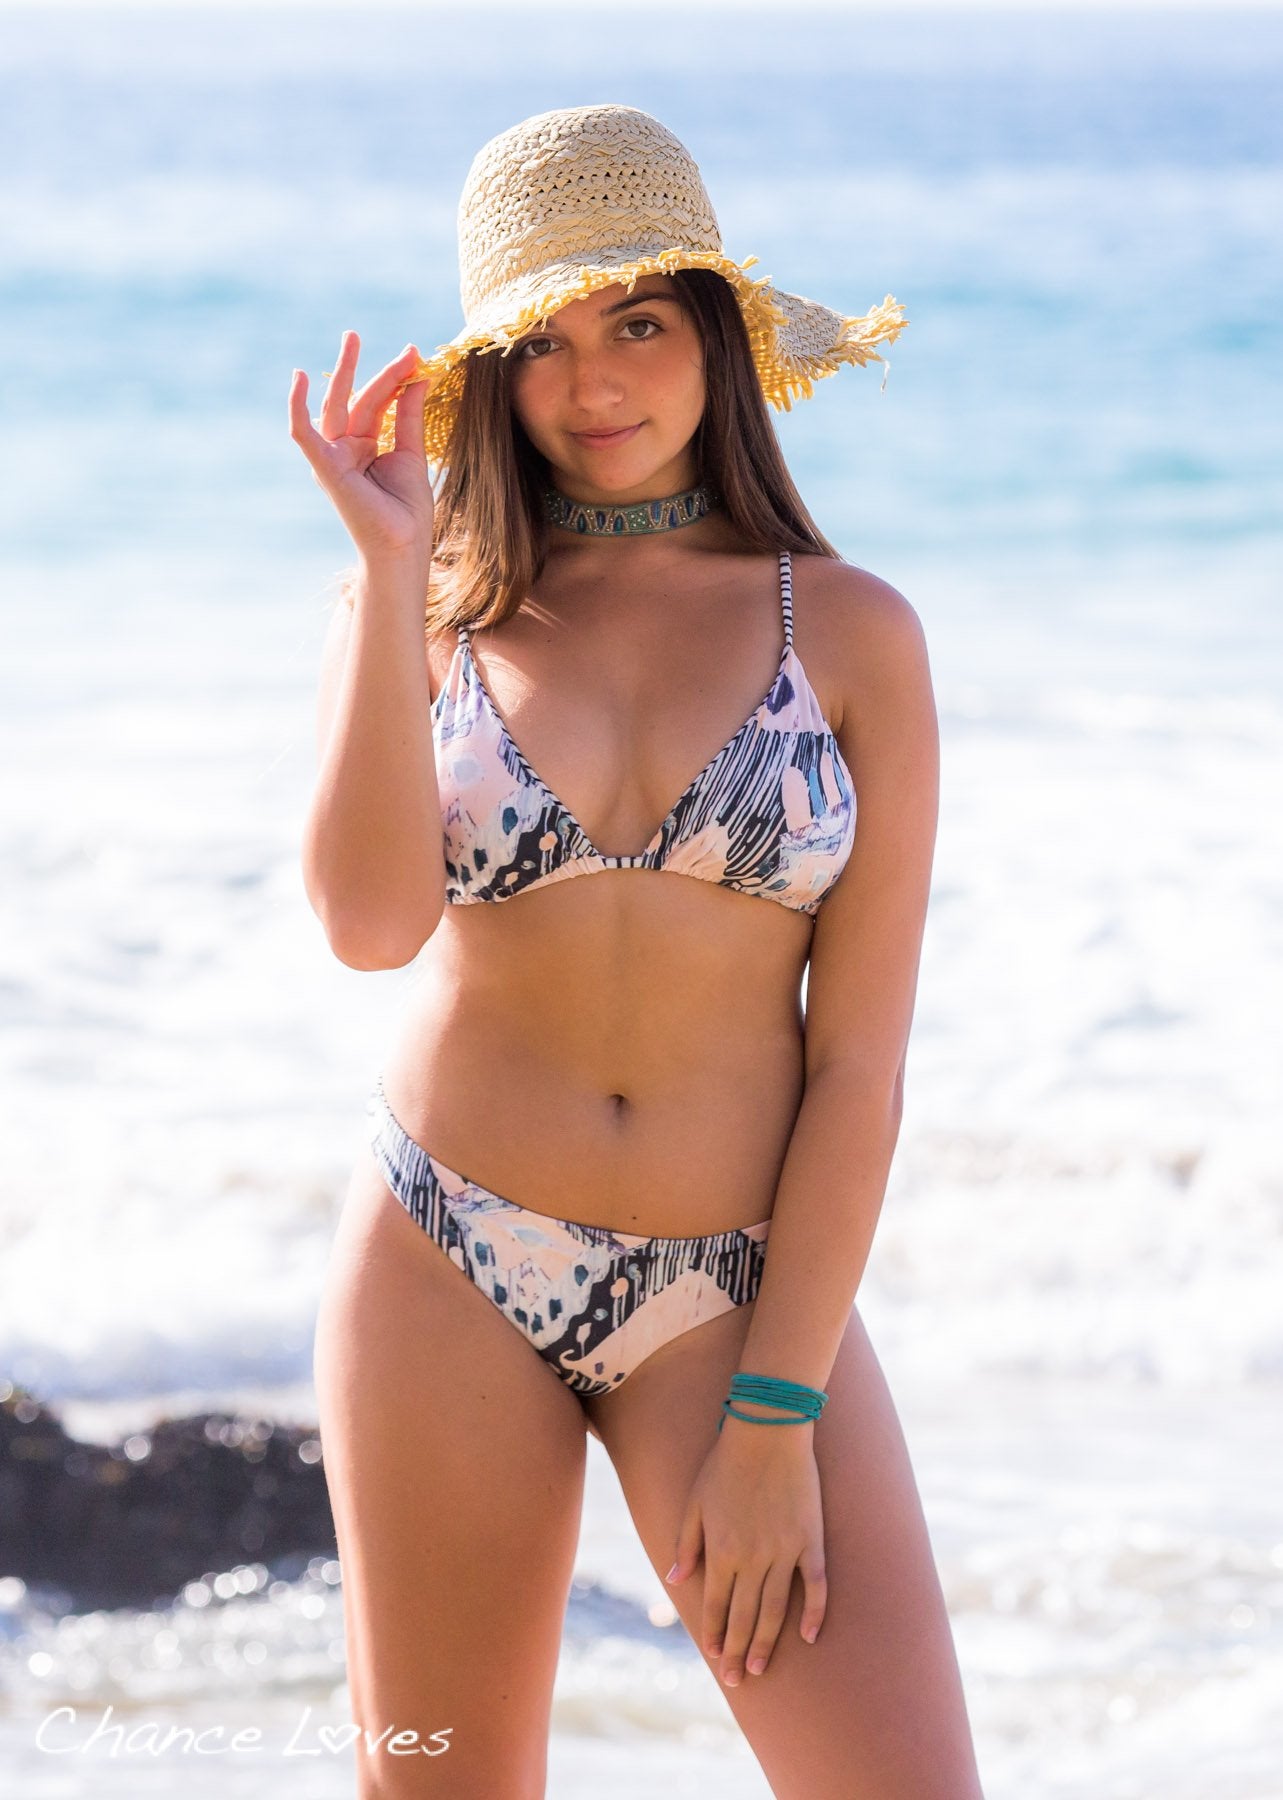 Beach Fun in one of the newest designs by Chance Loves Swimwear.